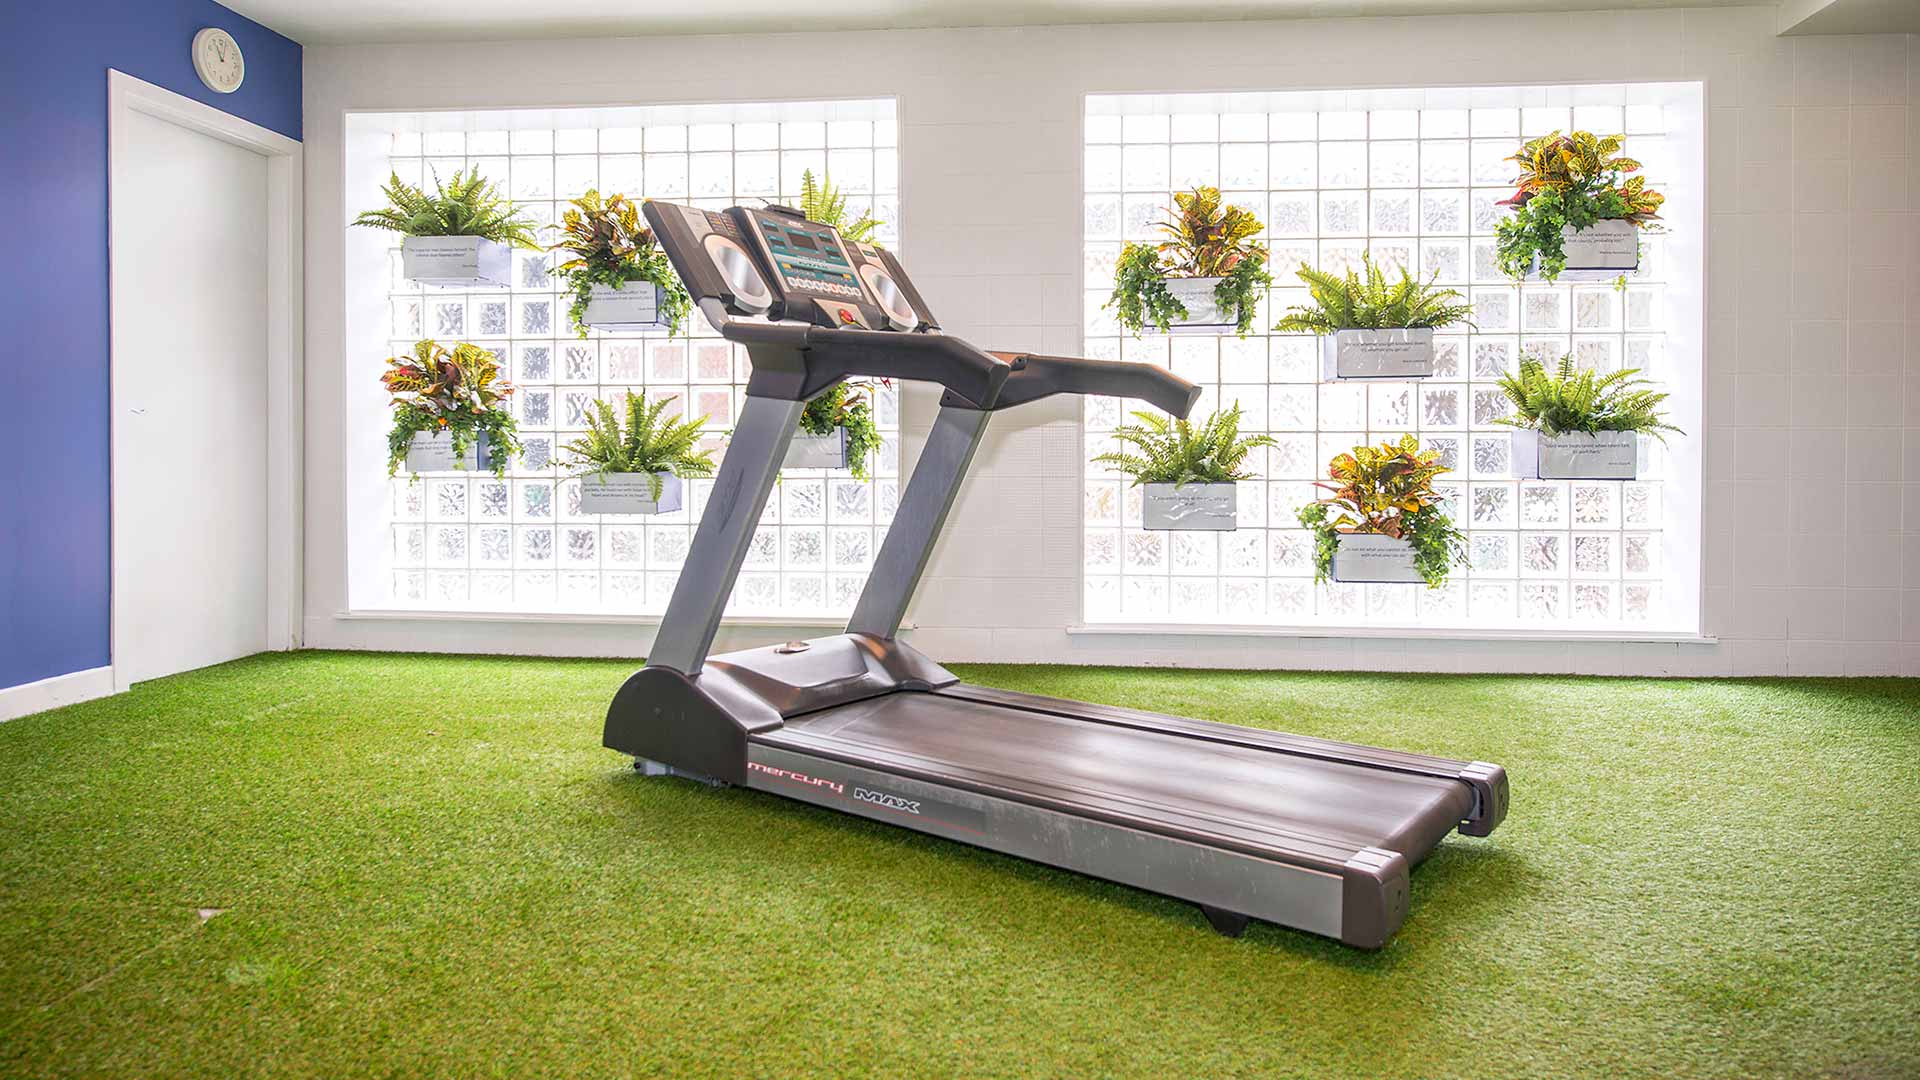 Area of Cork Airport Hotel Gym with treadmill and glass wall filled with plants